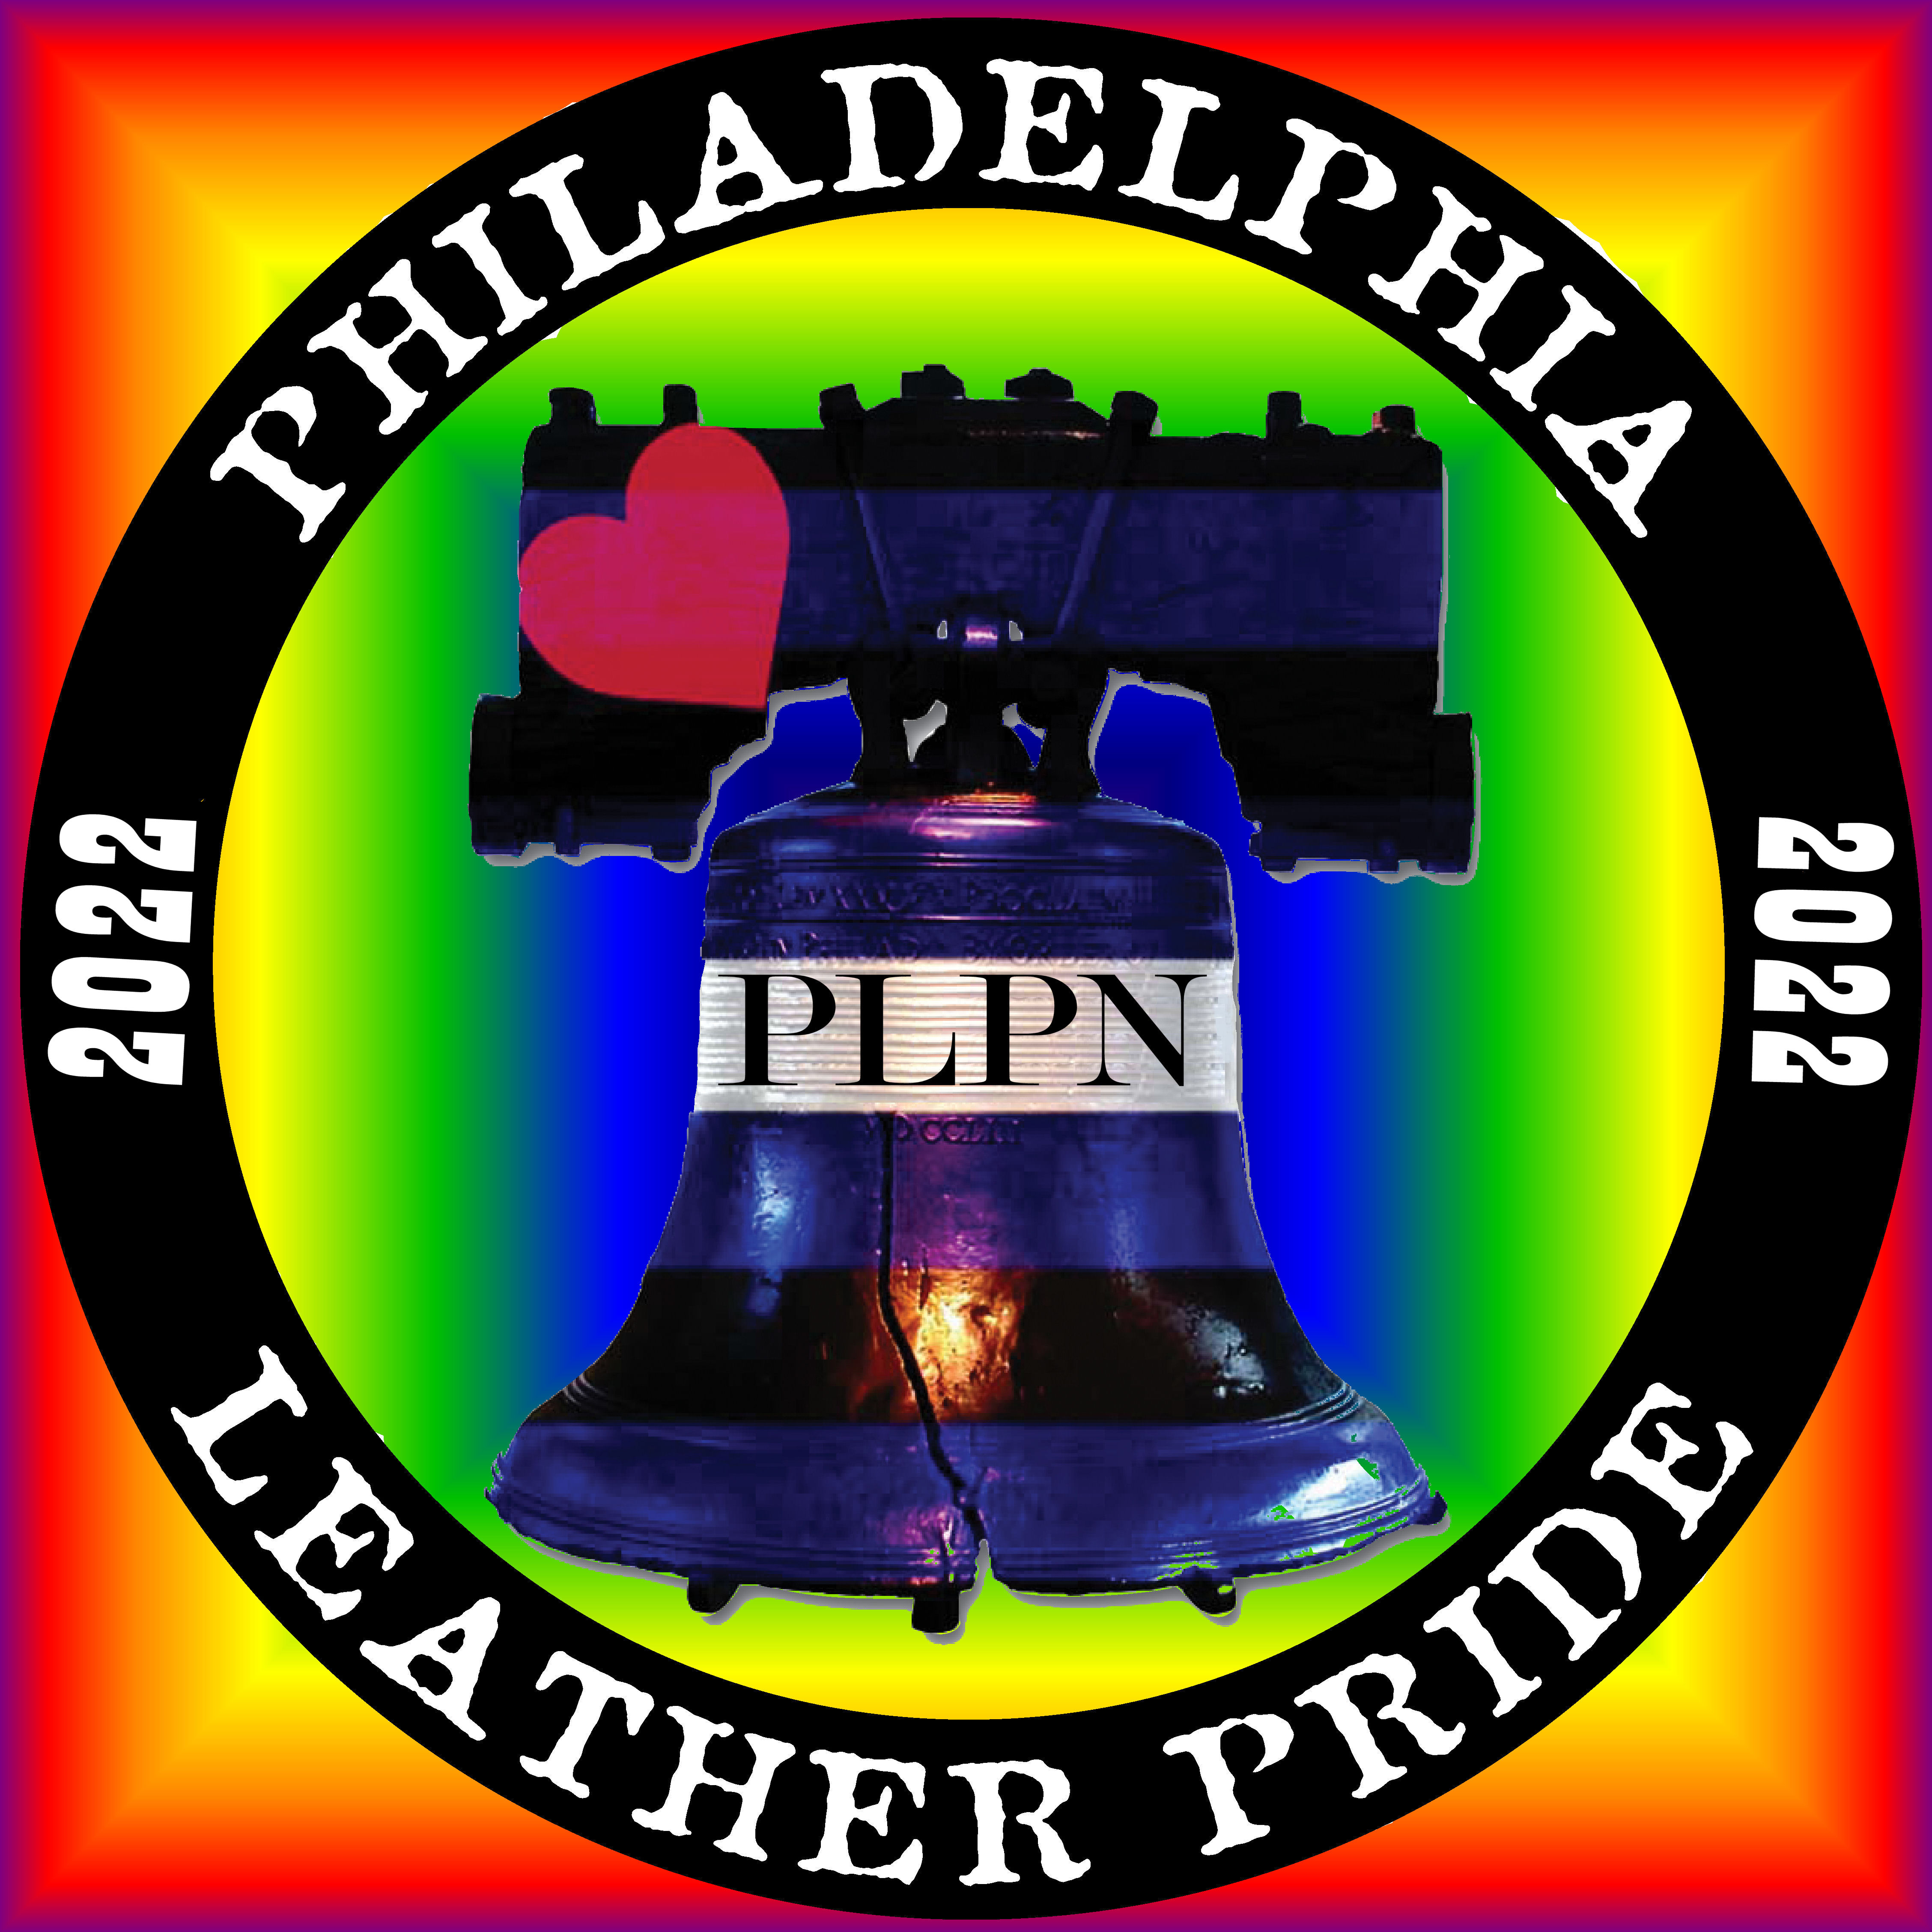 Philly Leather Pride, LTD